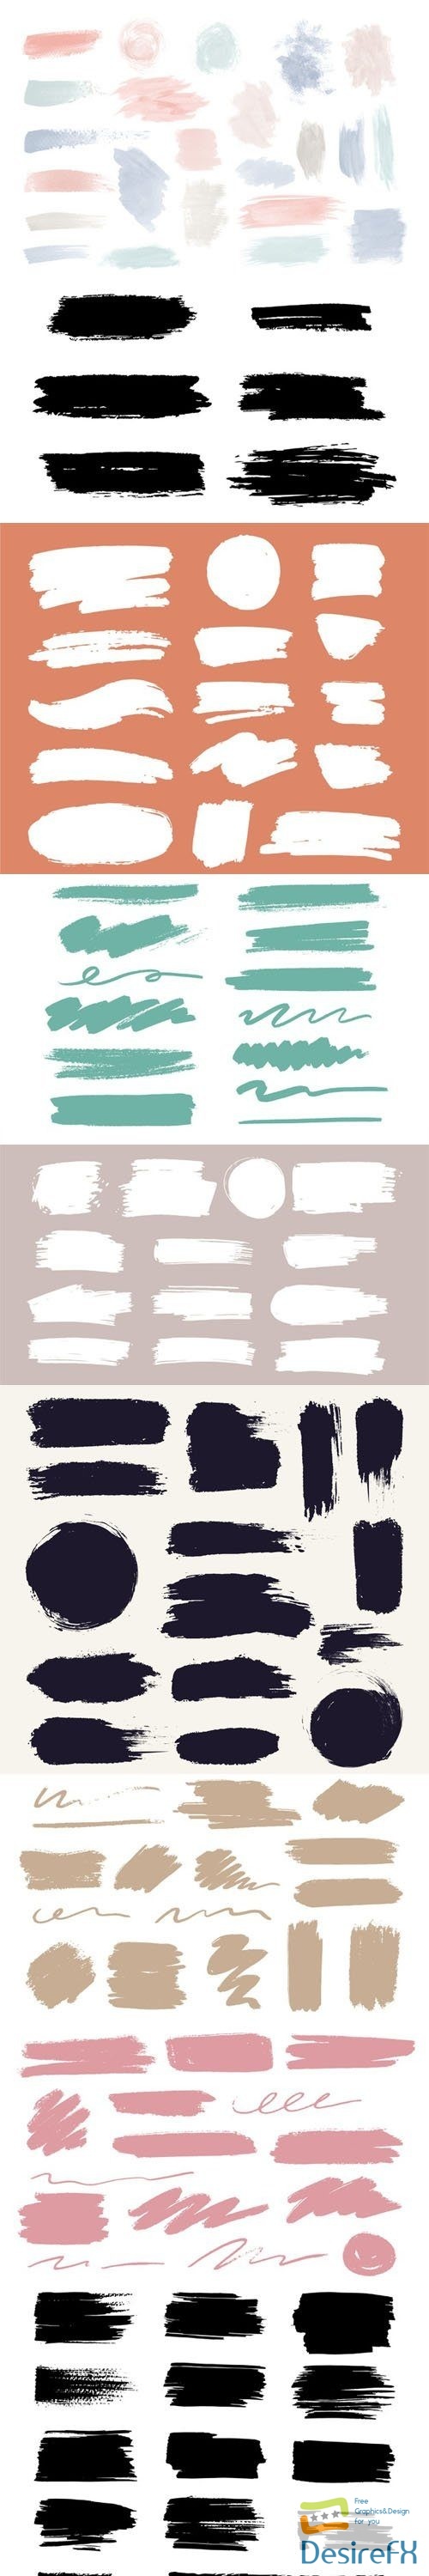 146 Colorful Ink Brush Stroke Vector Templates